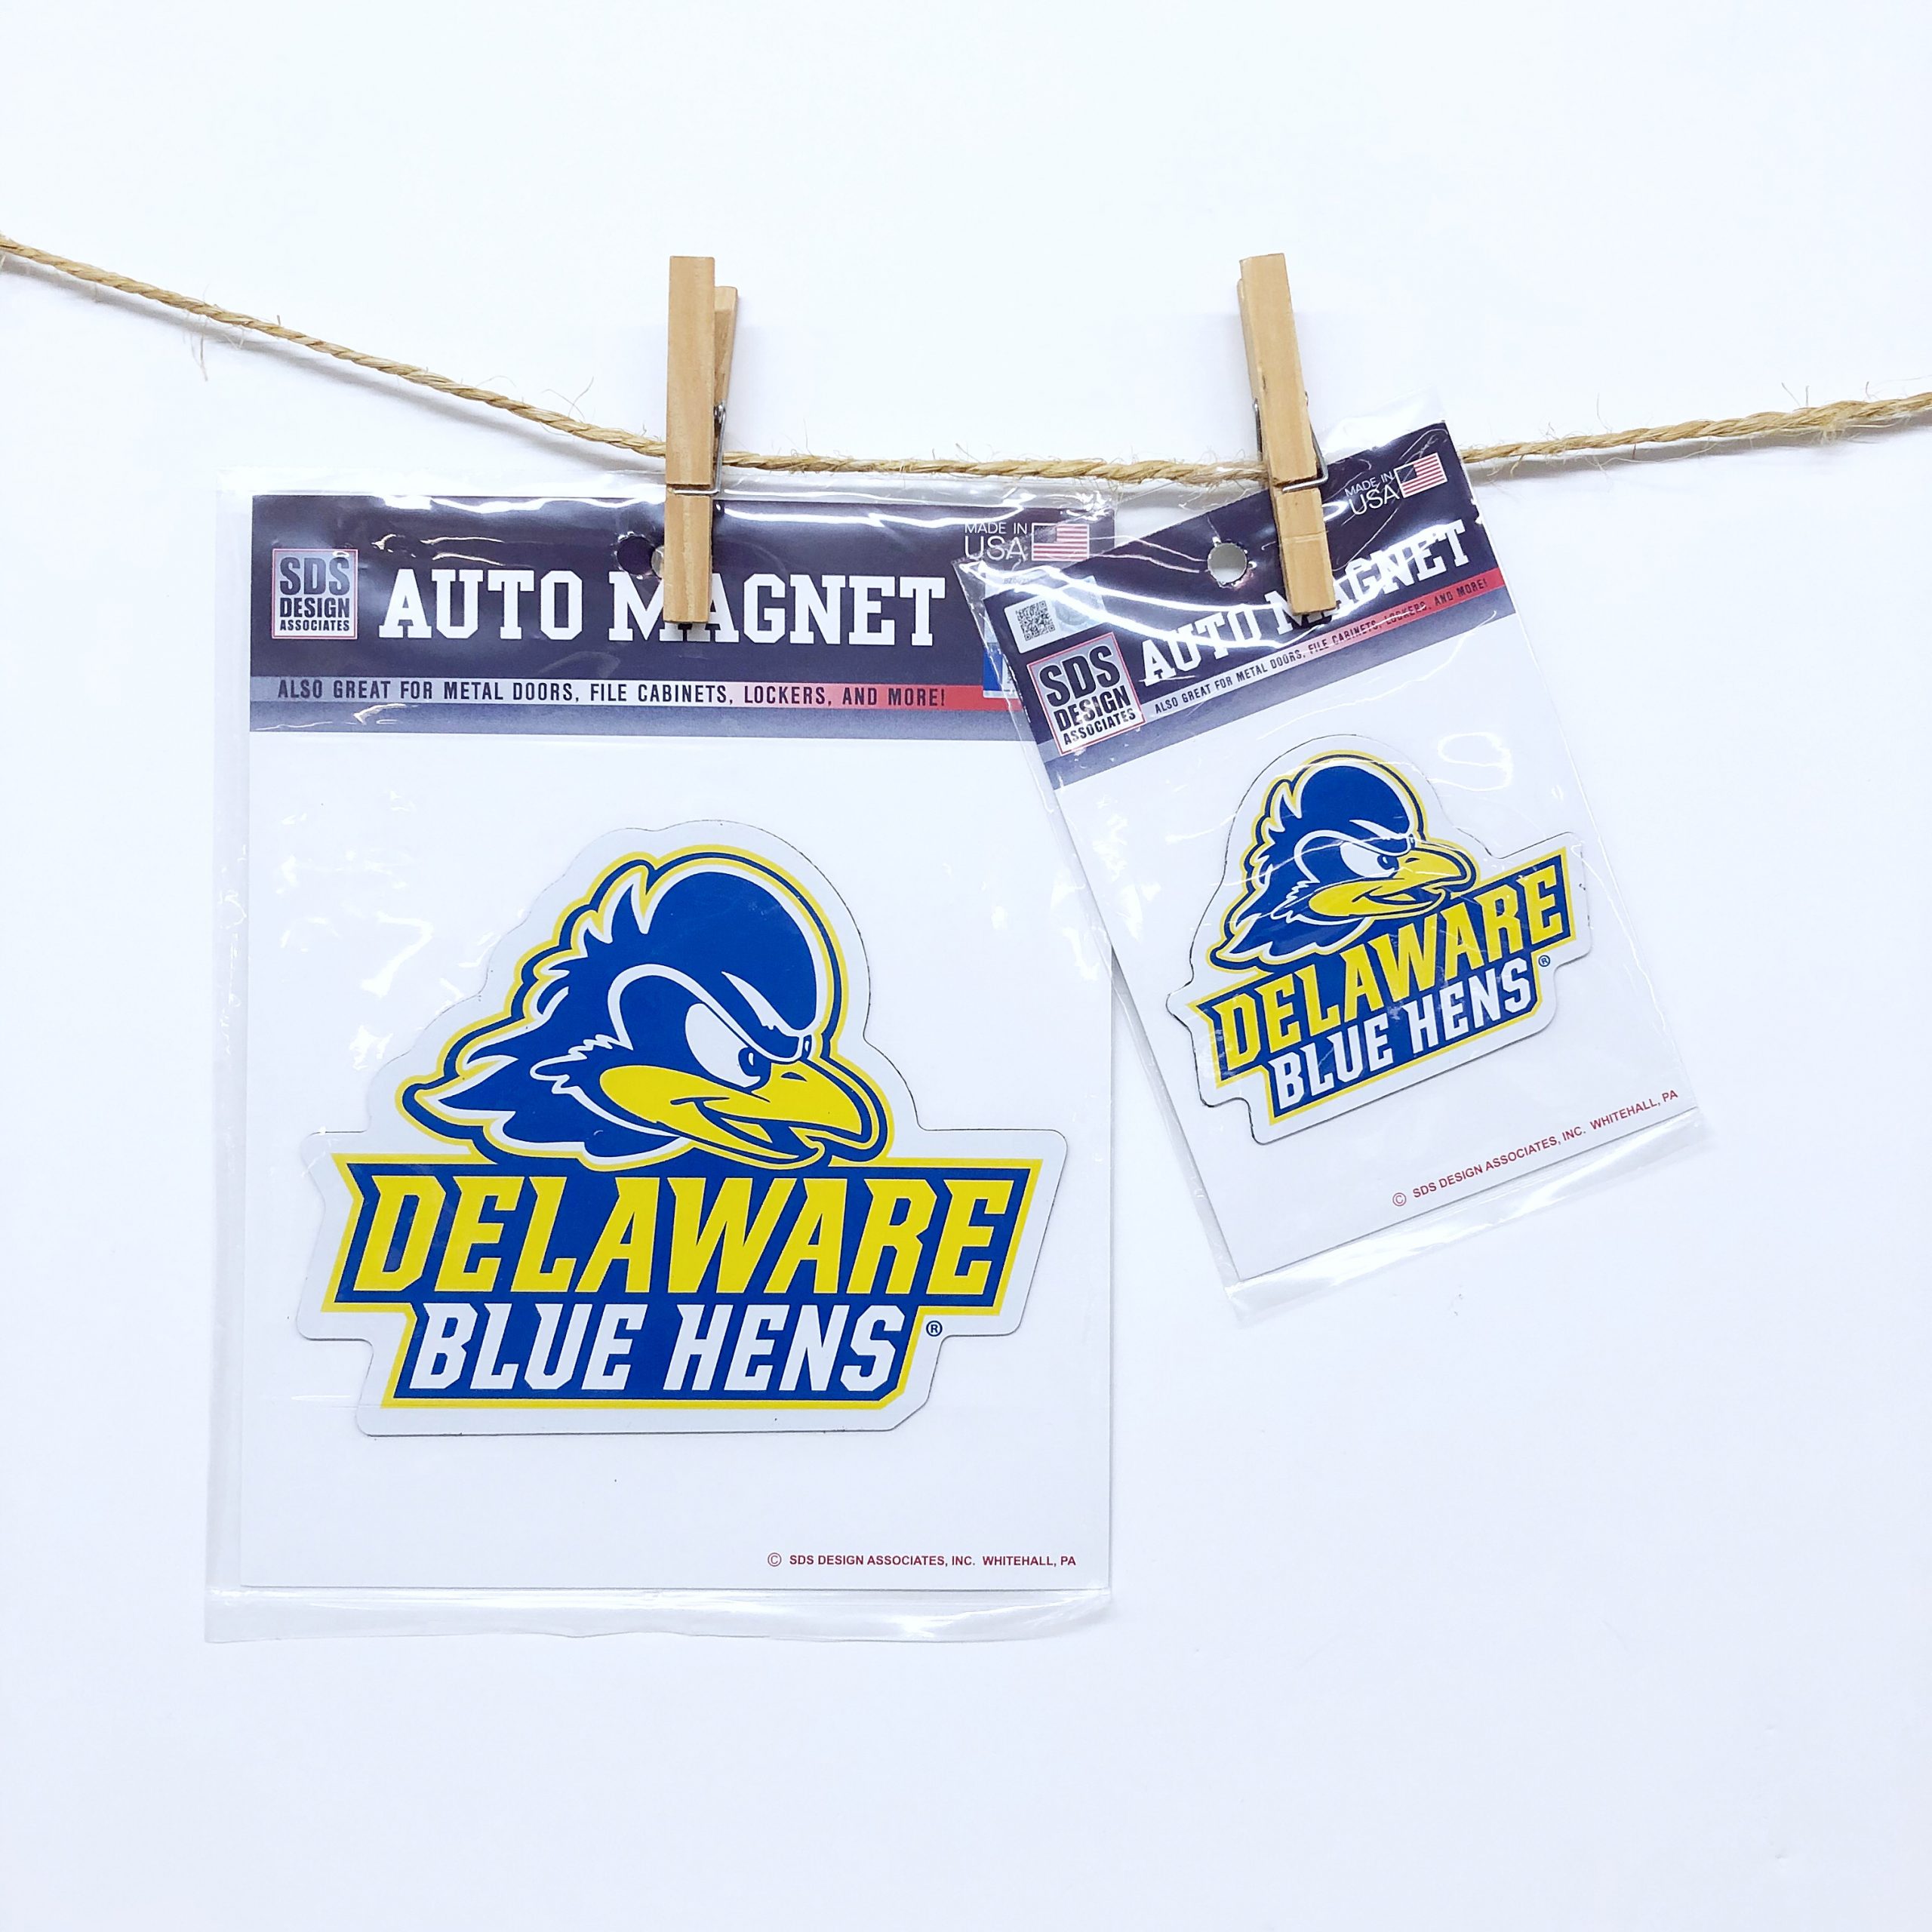 https://www.national5and10.com/wp-content/uploads/2019/07/University-of-Delaware-Stacked-Athletic-Logo-Car-Magnet-scaled.jpg